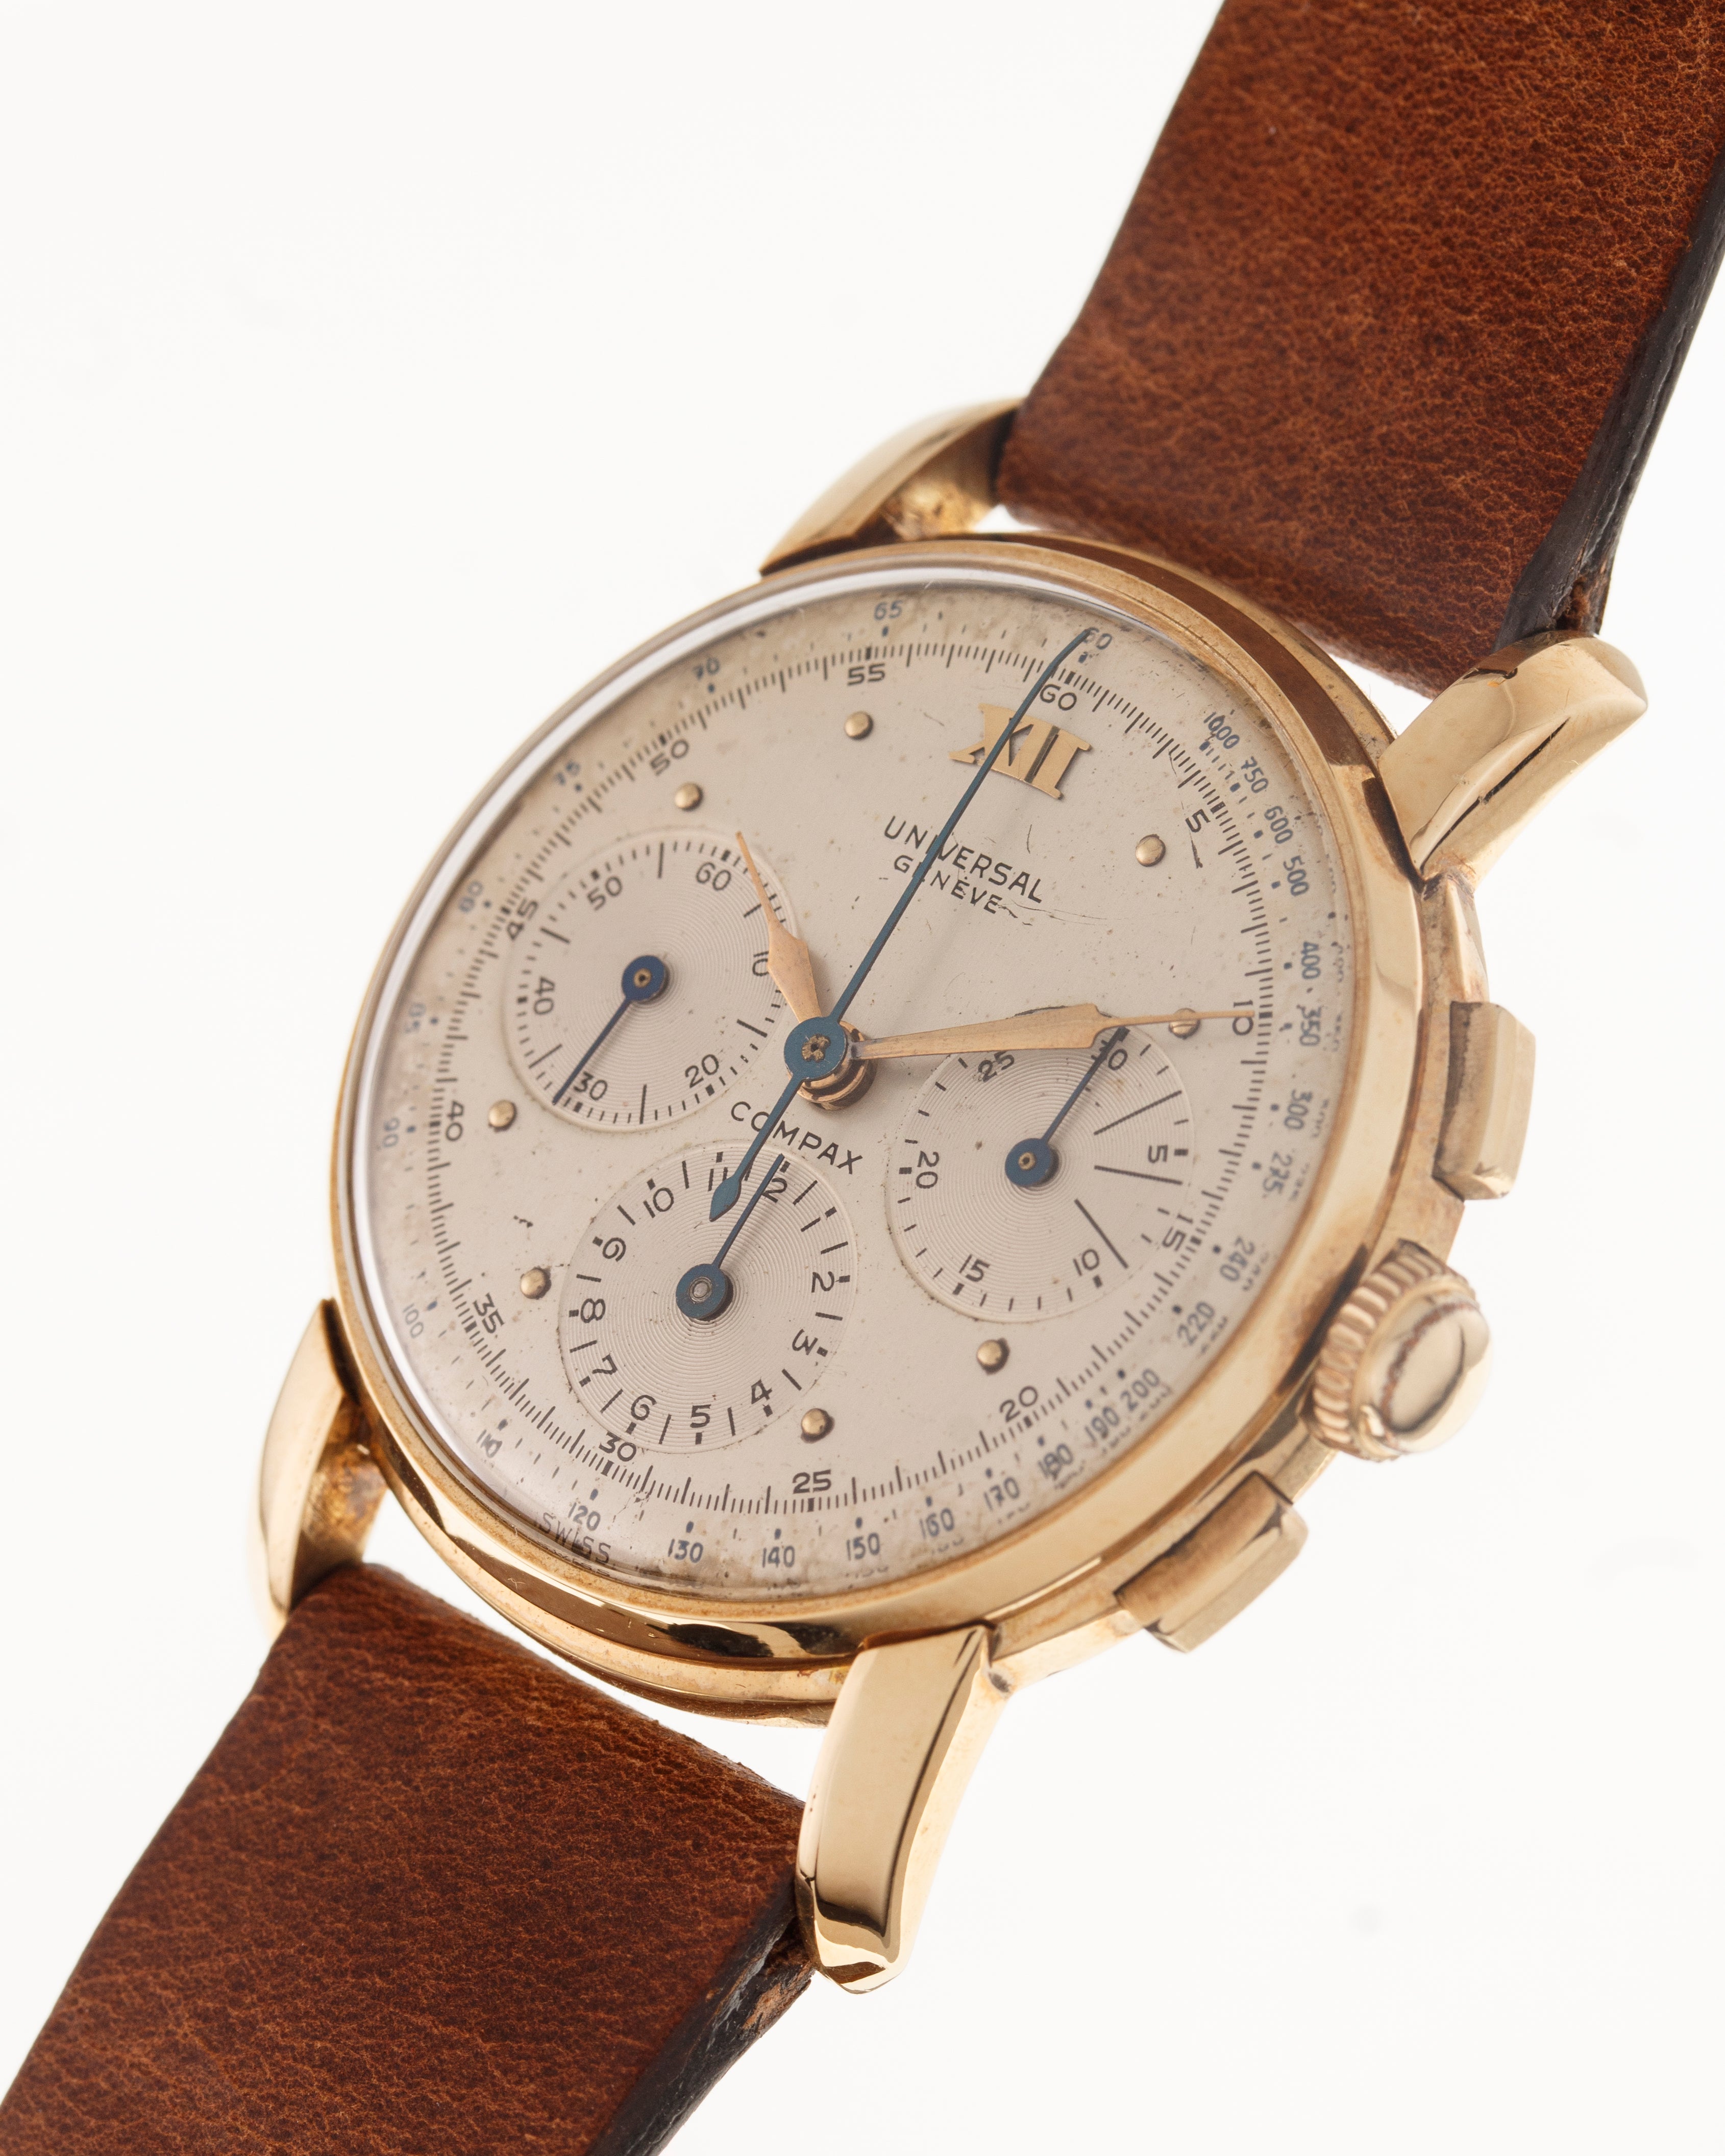 Universal Genève Ref. 52208 Compax - yellow gold with white dial 